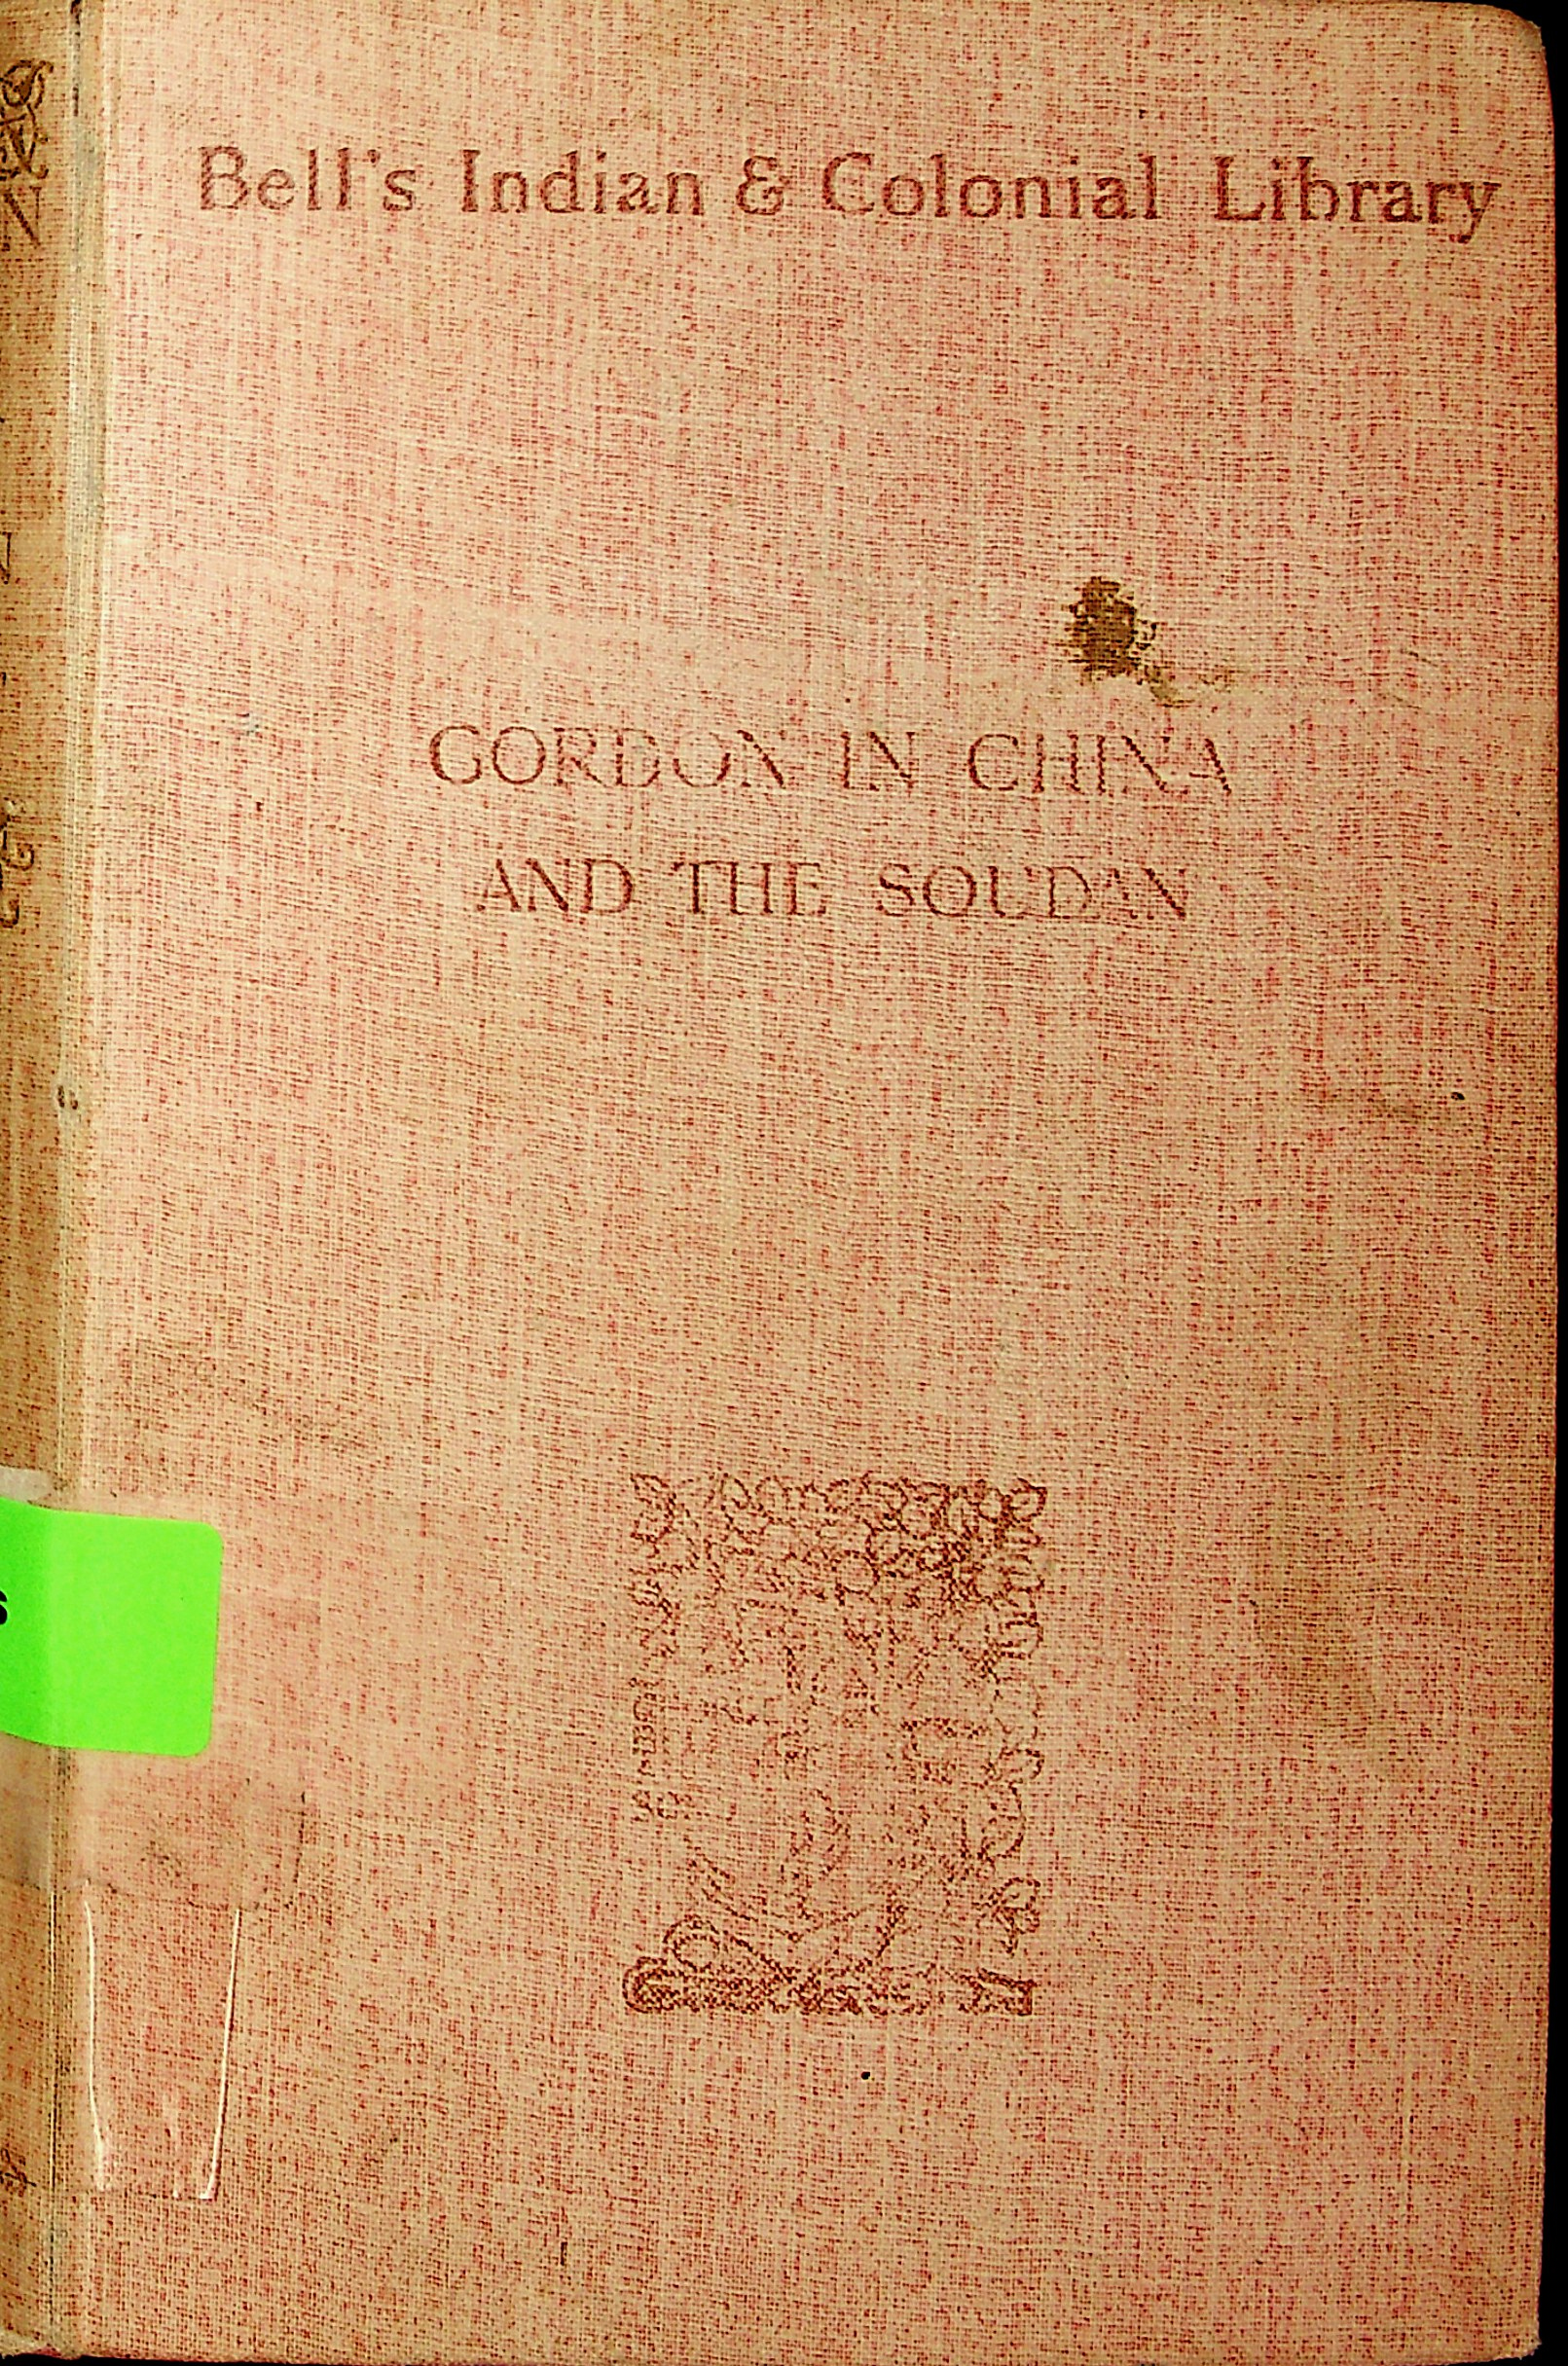 Gordon in China and the Soudan 